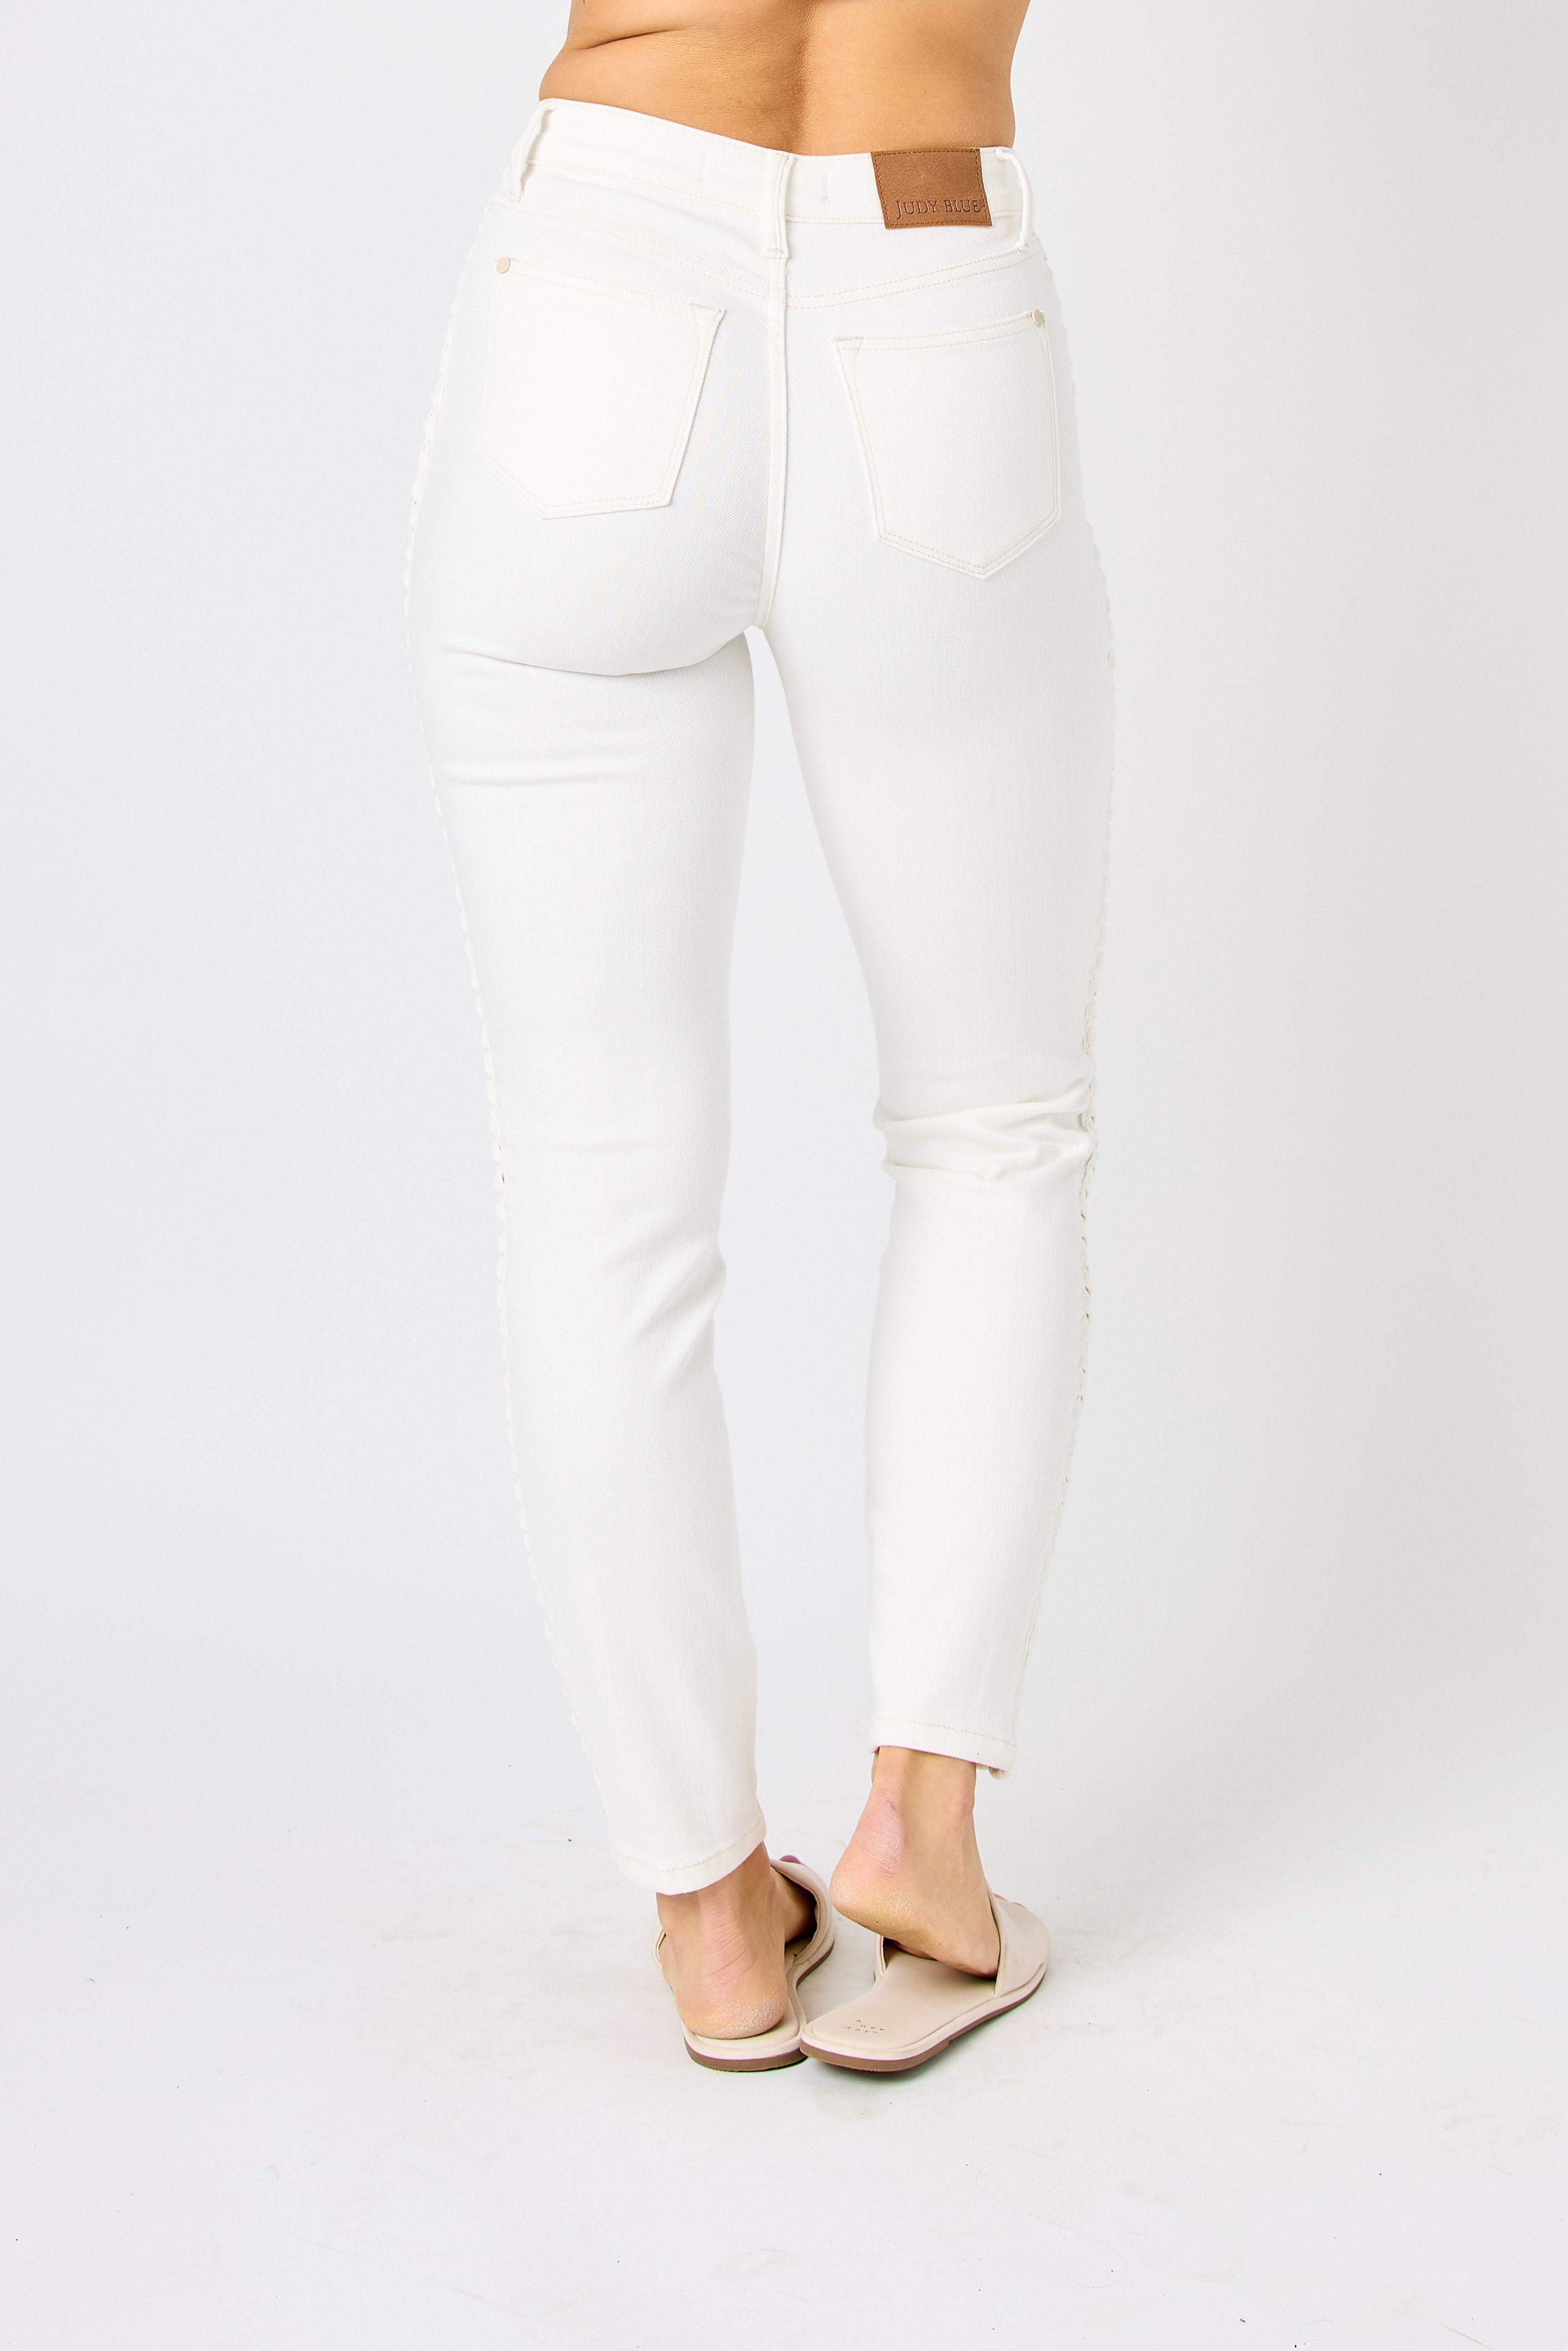 Judy Blue White Braided Jeans (88782)